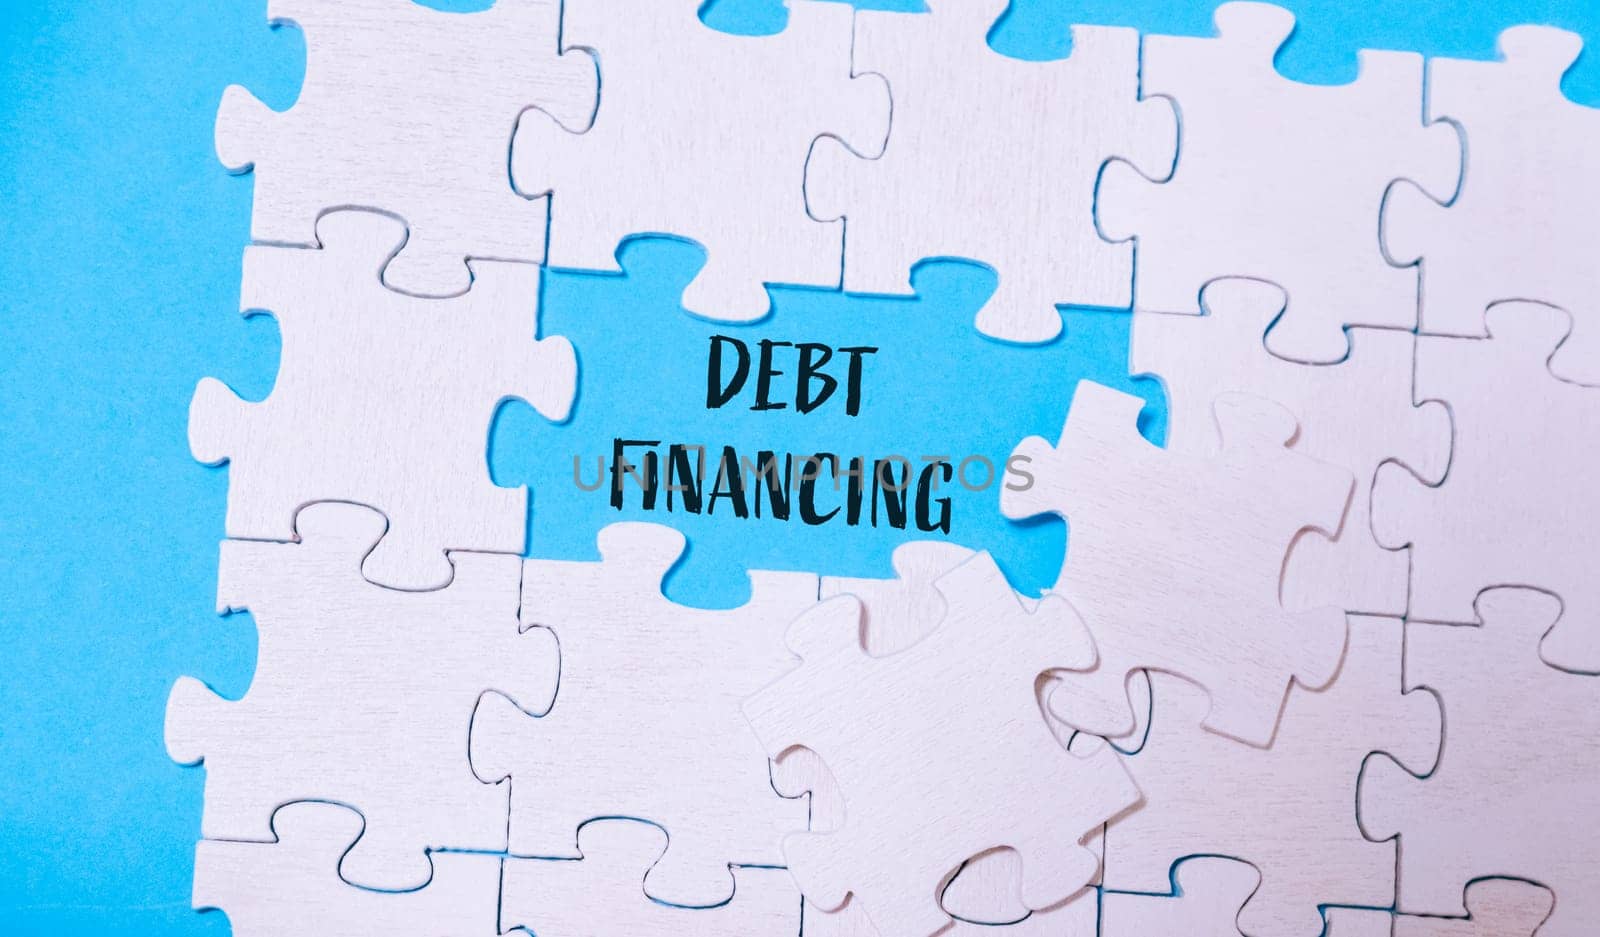 A jigsaw puzzle featuring the words debt financing in the center, illustrating the complexity and strategic nature of financial arrangements.